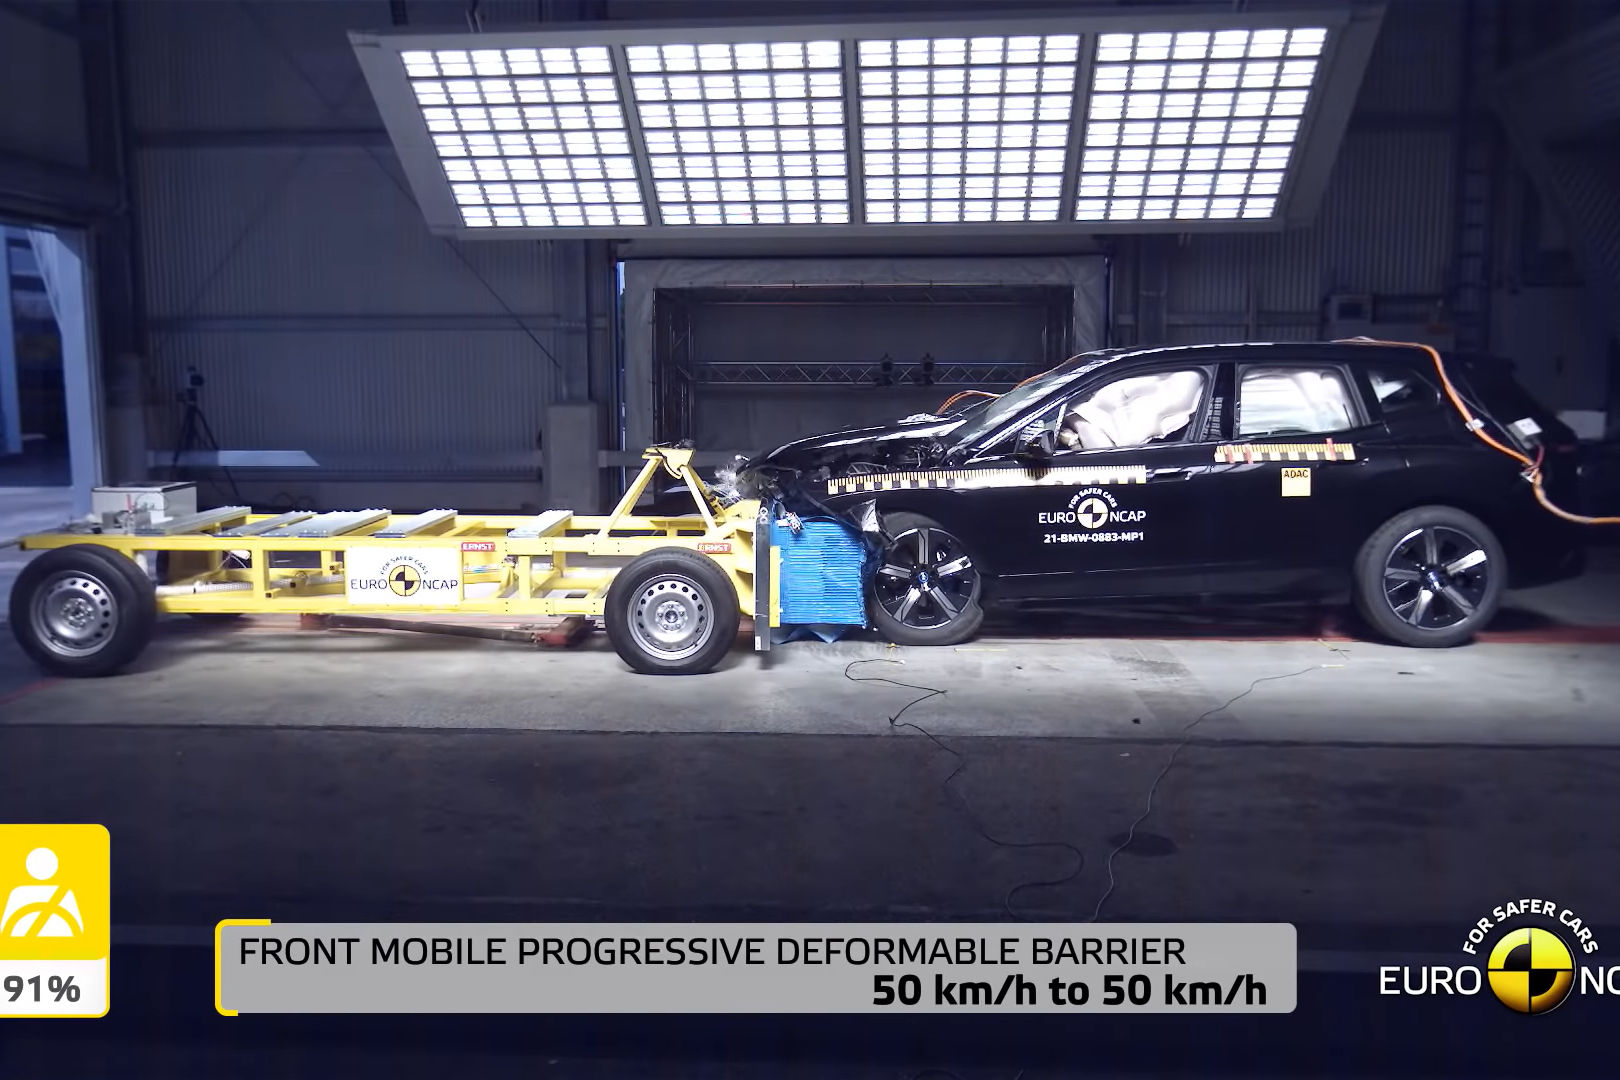 The India-bound BMW iX Has Received A 5 Star Safety Rating From EURO NCAP